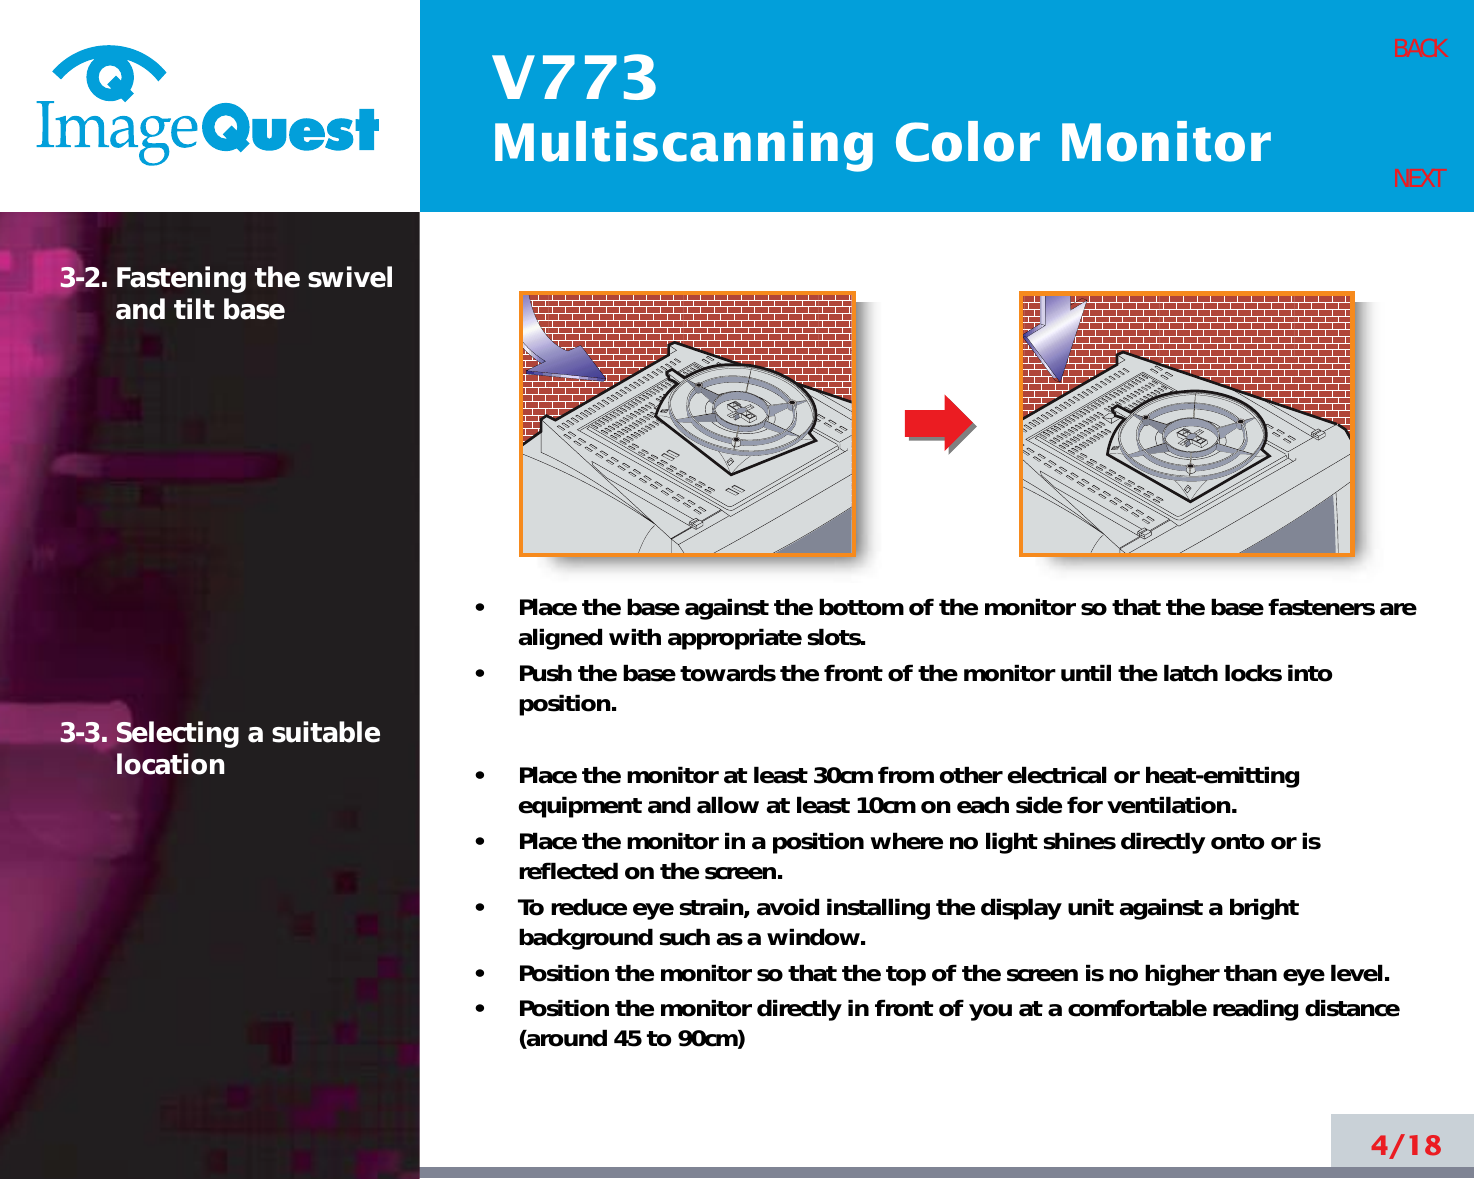 V773Multiscanning Color Monitor4/18BACKNEXT3-2. Fastening the swiveland tilt base3-3. Selecting a suitablelocation•     Place the base against the bottom of the monitor so that the base fasteners arealigned with appropriate slots.•     Push the base towards the front of the monitor until the latch locks intoposition.•     Place the monitor at least 30cm from other electrical or heat-emittingequipment and allow at least 10cm on each side for ventilation.•     Place the monitor in a position where no light shines directly onto or isreflected on the screen.•     To reduce eye strain, avoid installing the display unit against a brightbackground such as a window.•     Position the monitor so that the top of the screen is no higher than eye level.•     Position the monitor directly in front of you at a comfortable reading distance(around 45 to 90cm) 